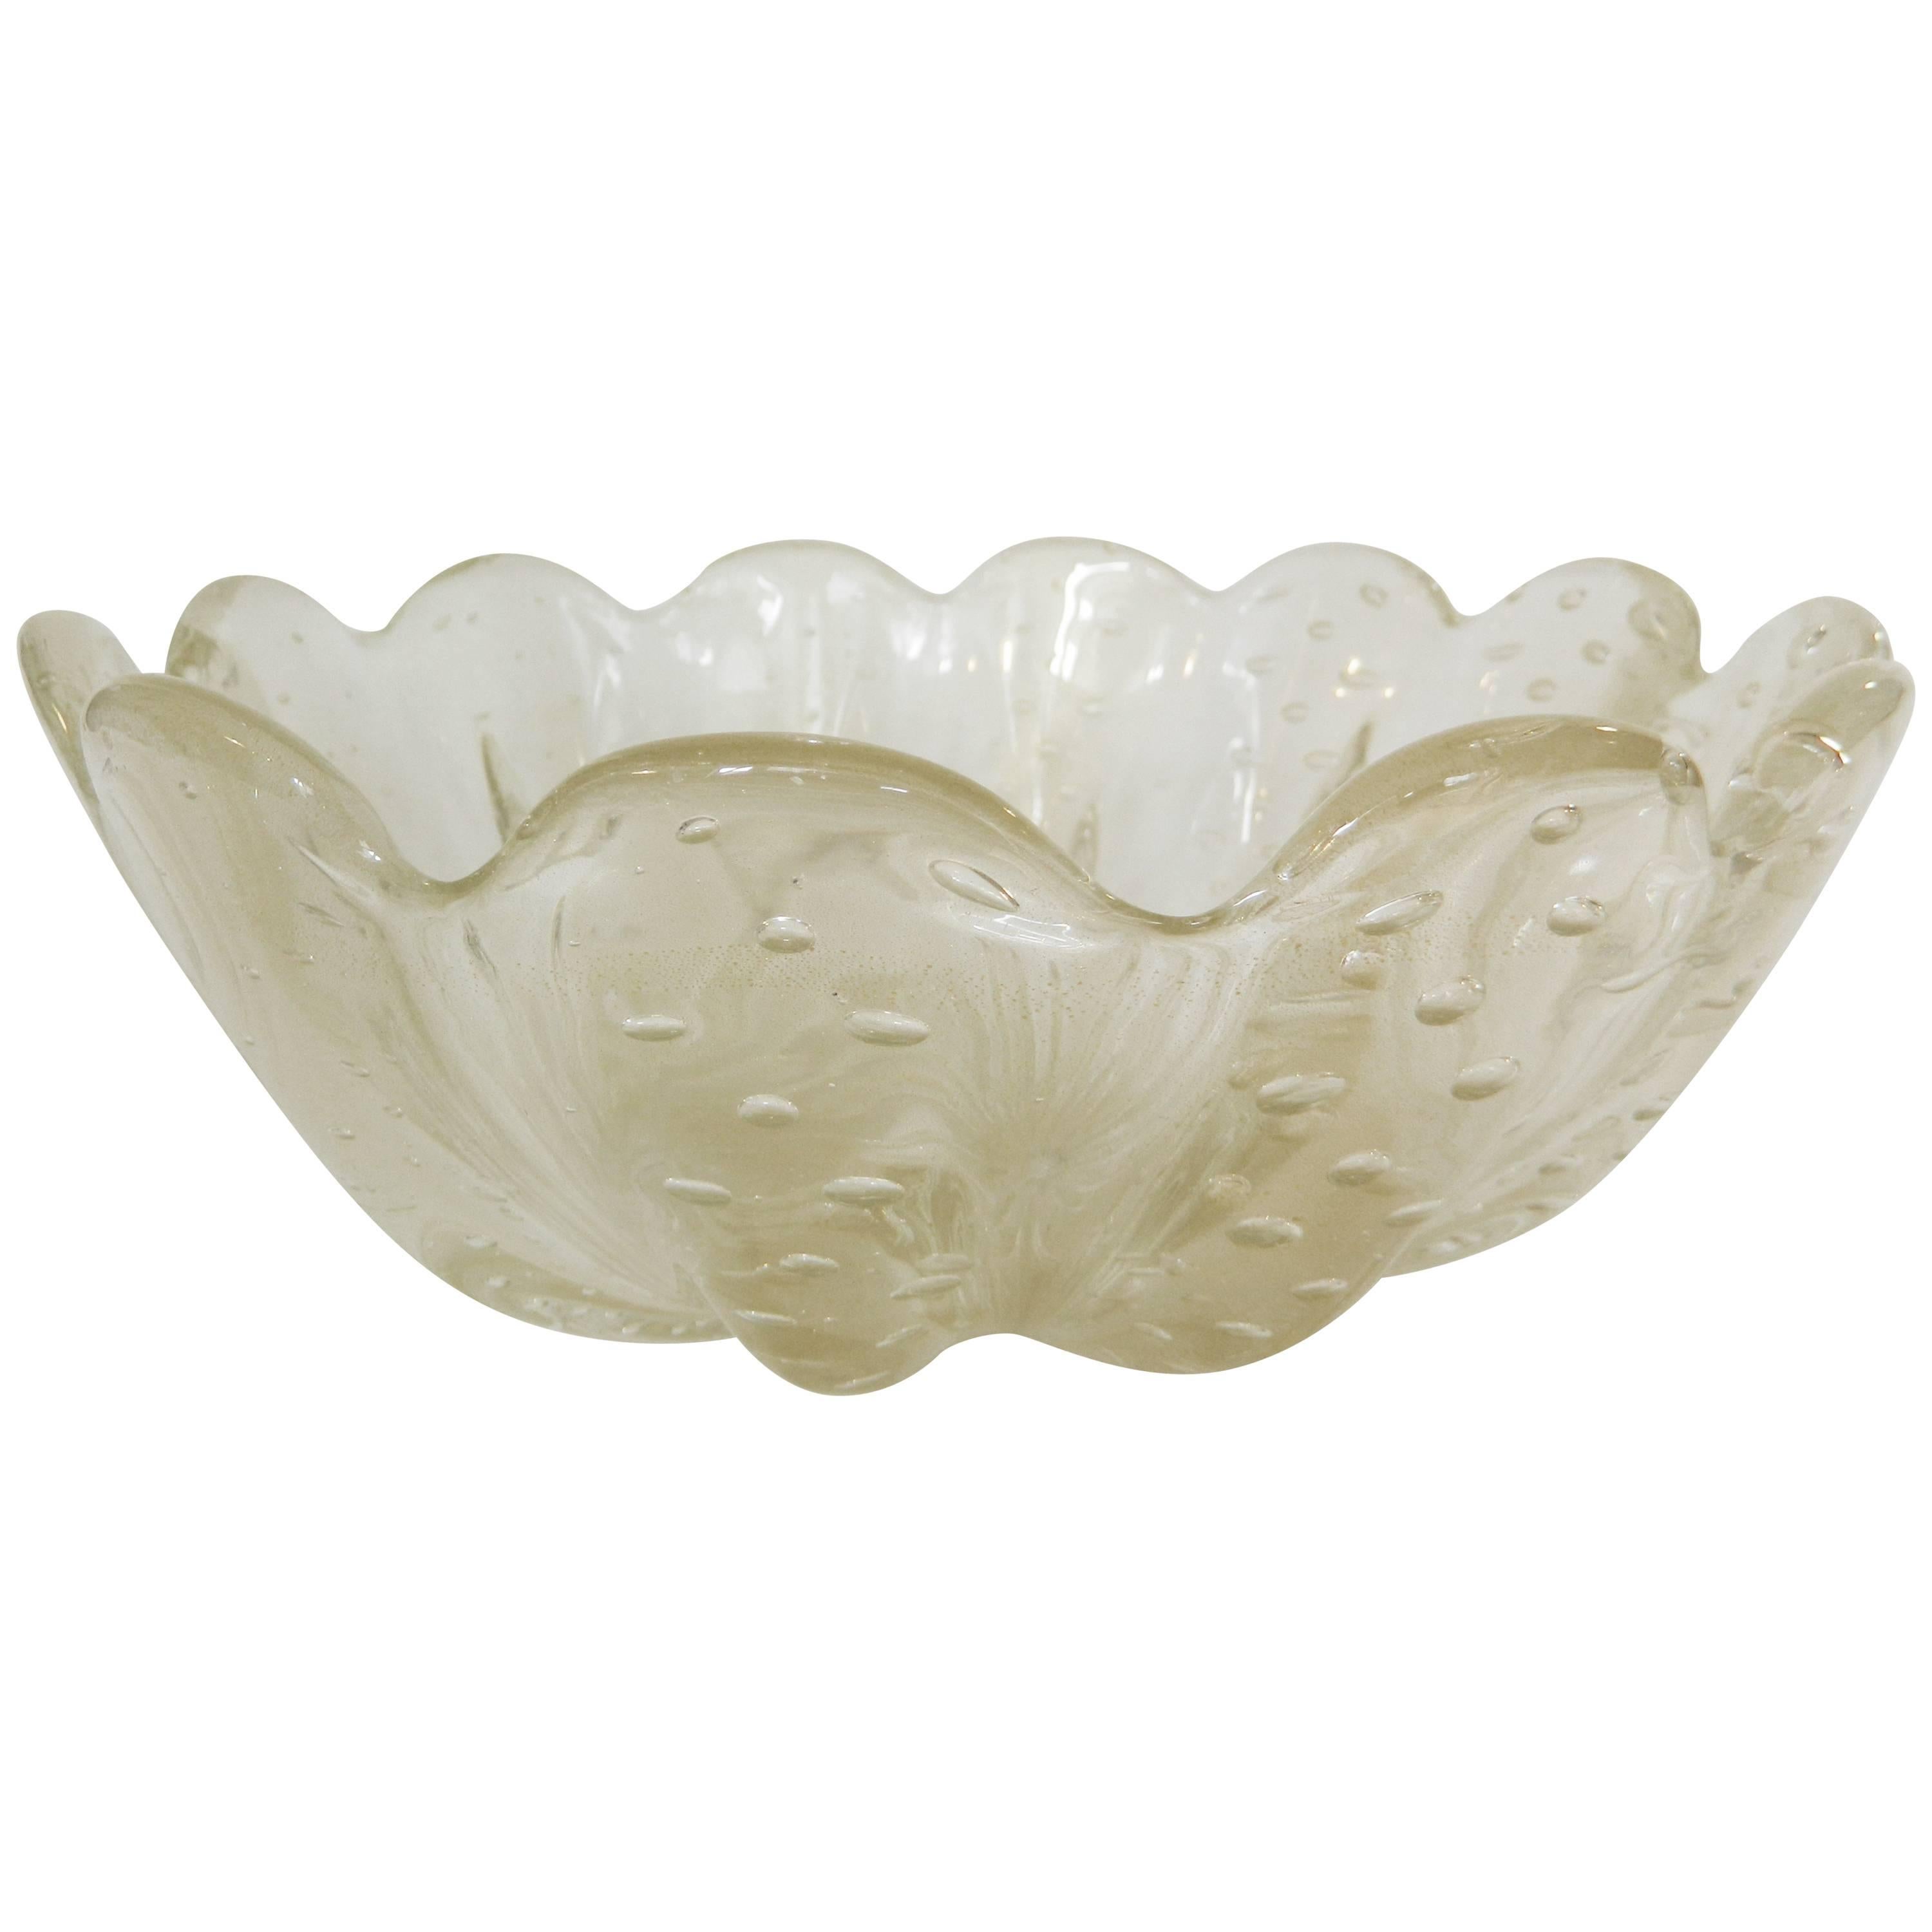 Mid-20th Century Murano Glass Bowl with Gold Flakes For Sale